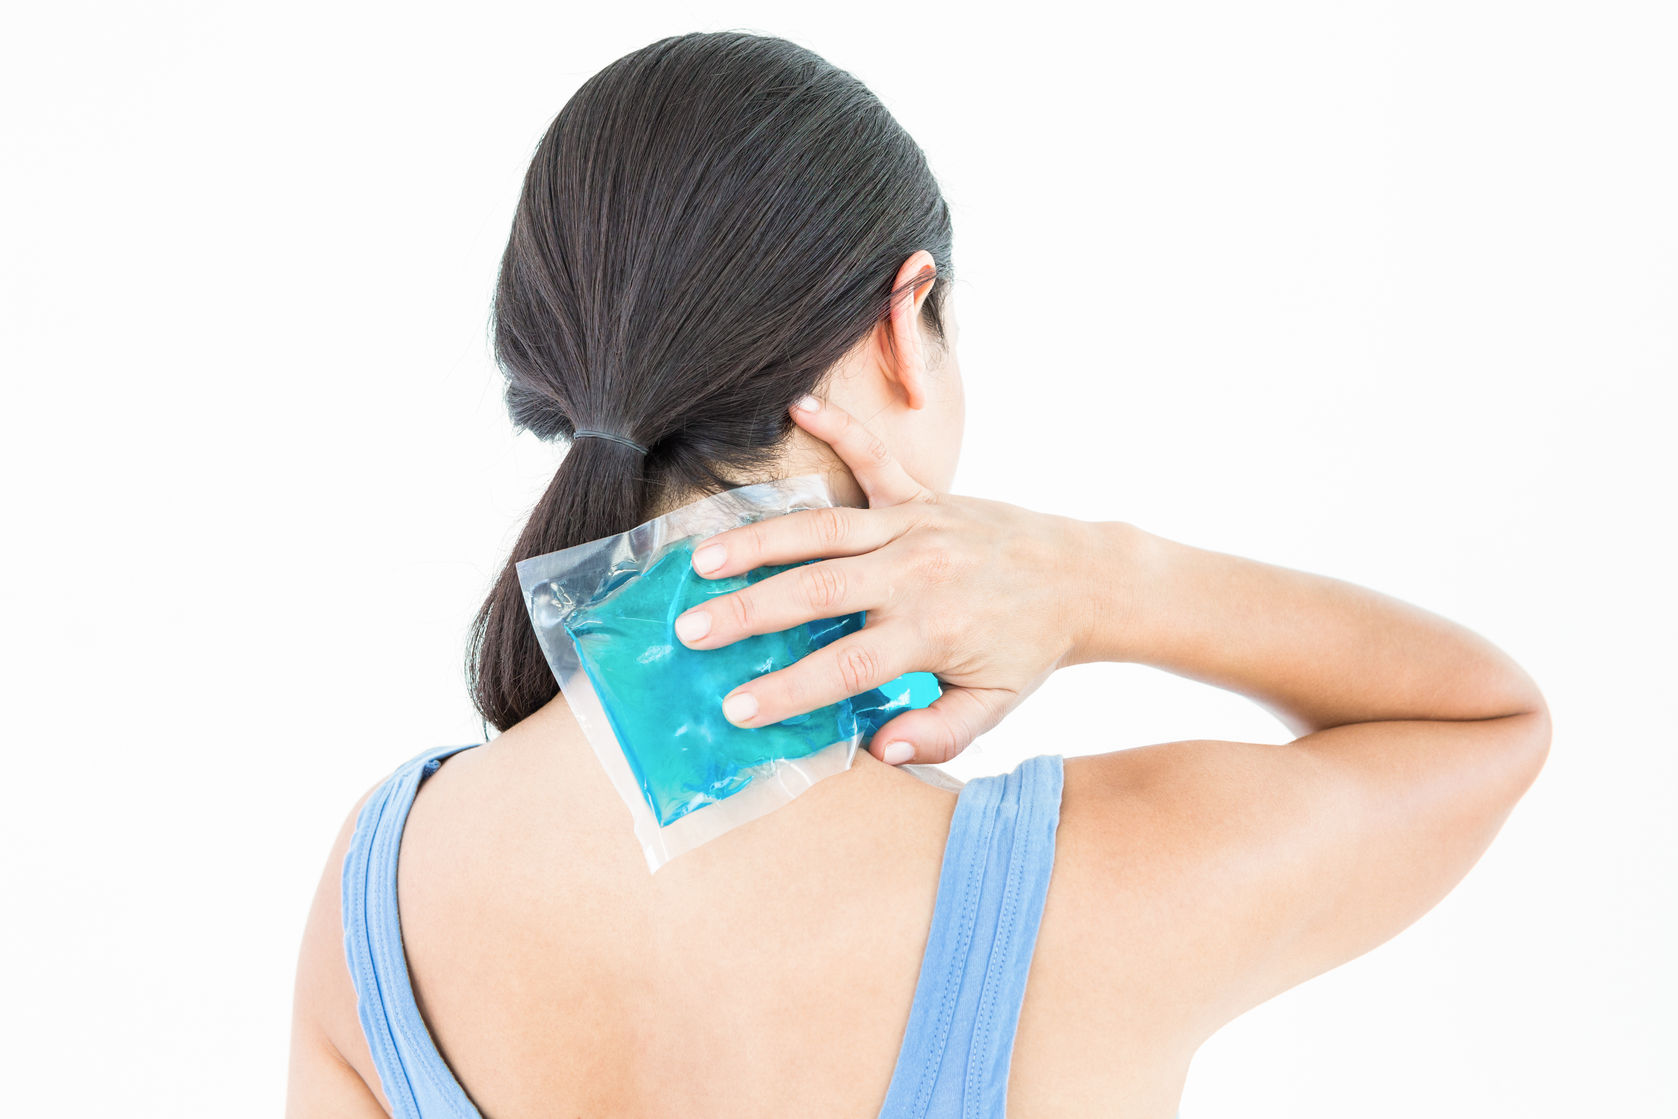 How to Treat a Pinched Nerve in the Neck – SAPNA Pain Management Blog